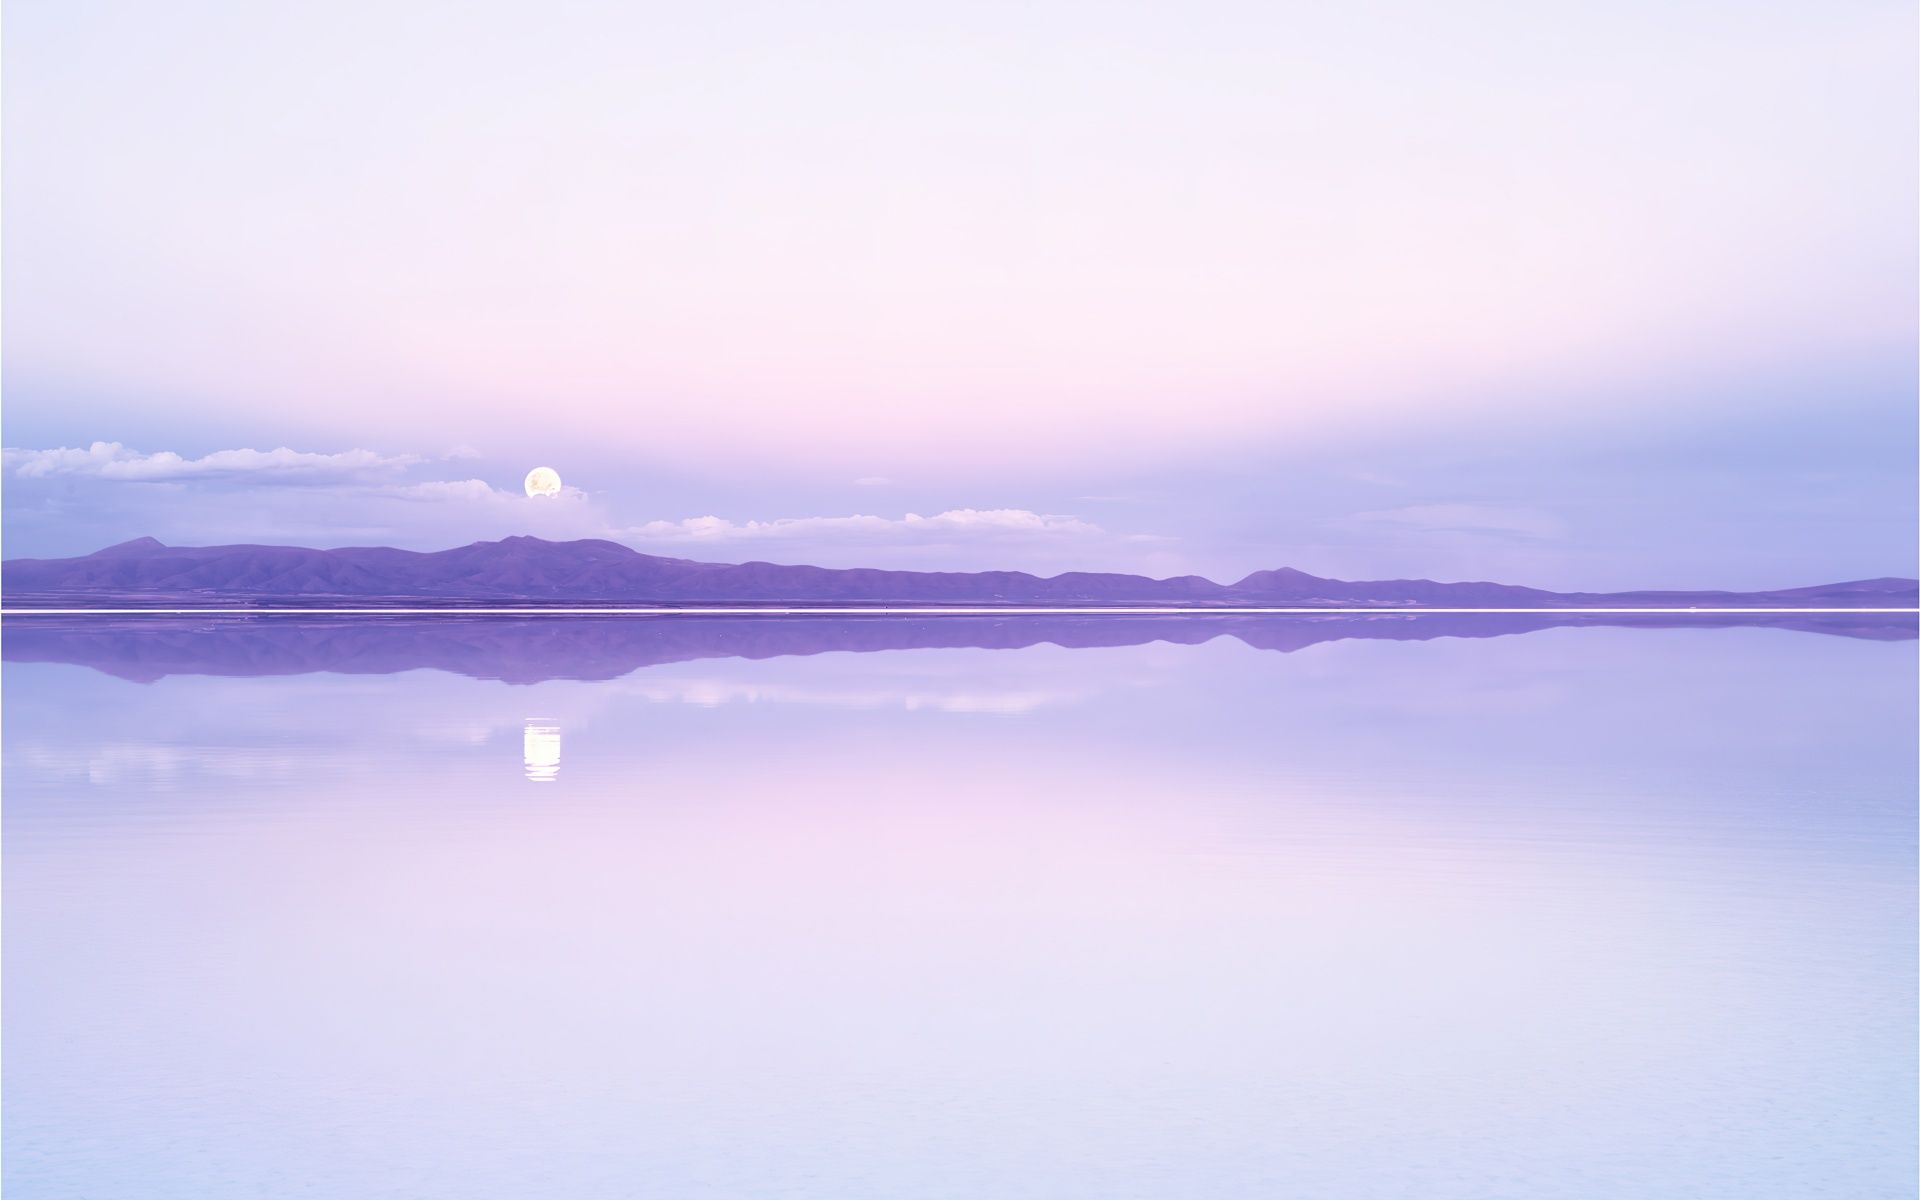 A full moon is seen in the sky over a calm lake - Purple, 1920x1200